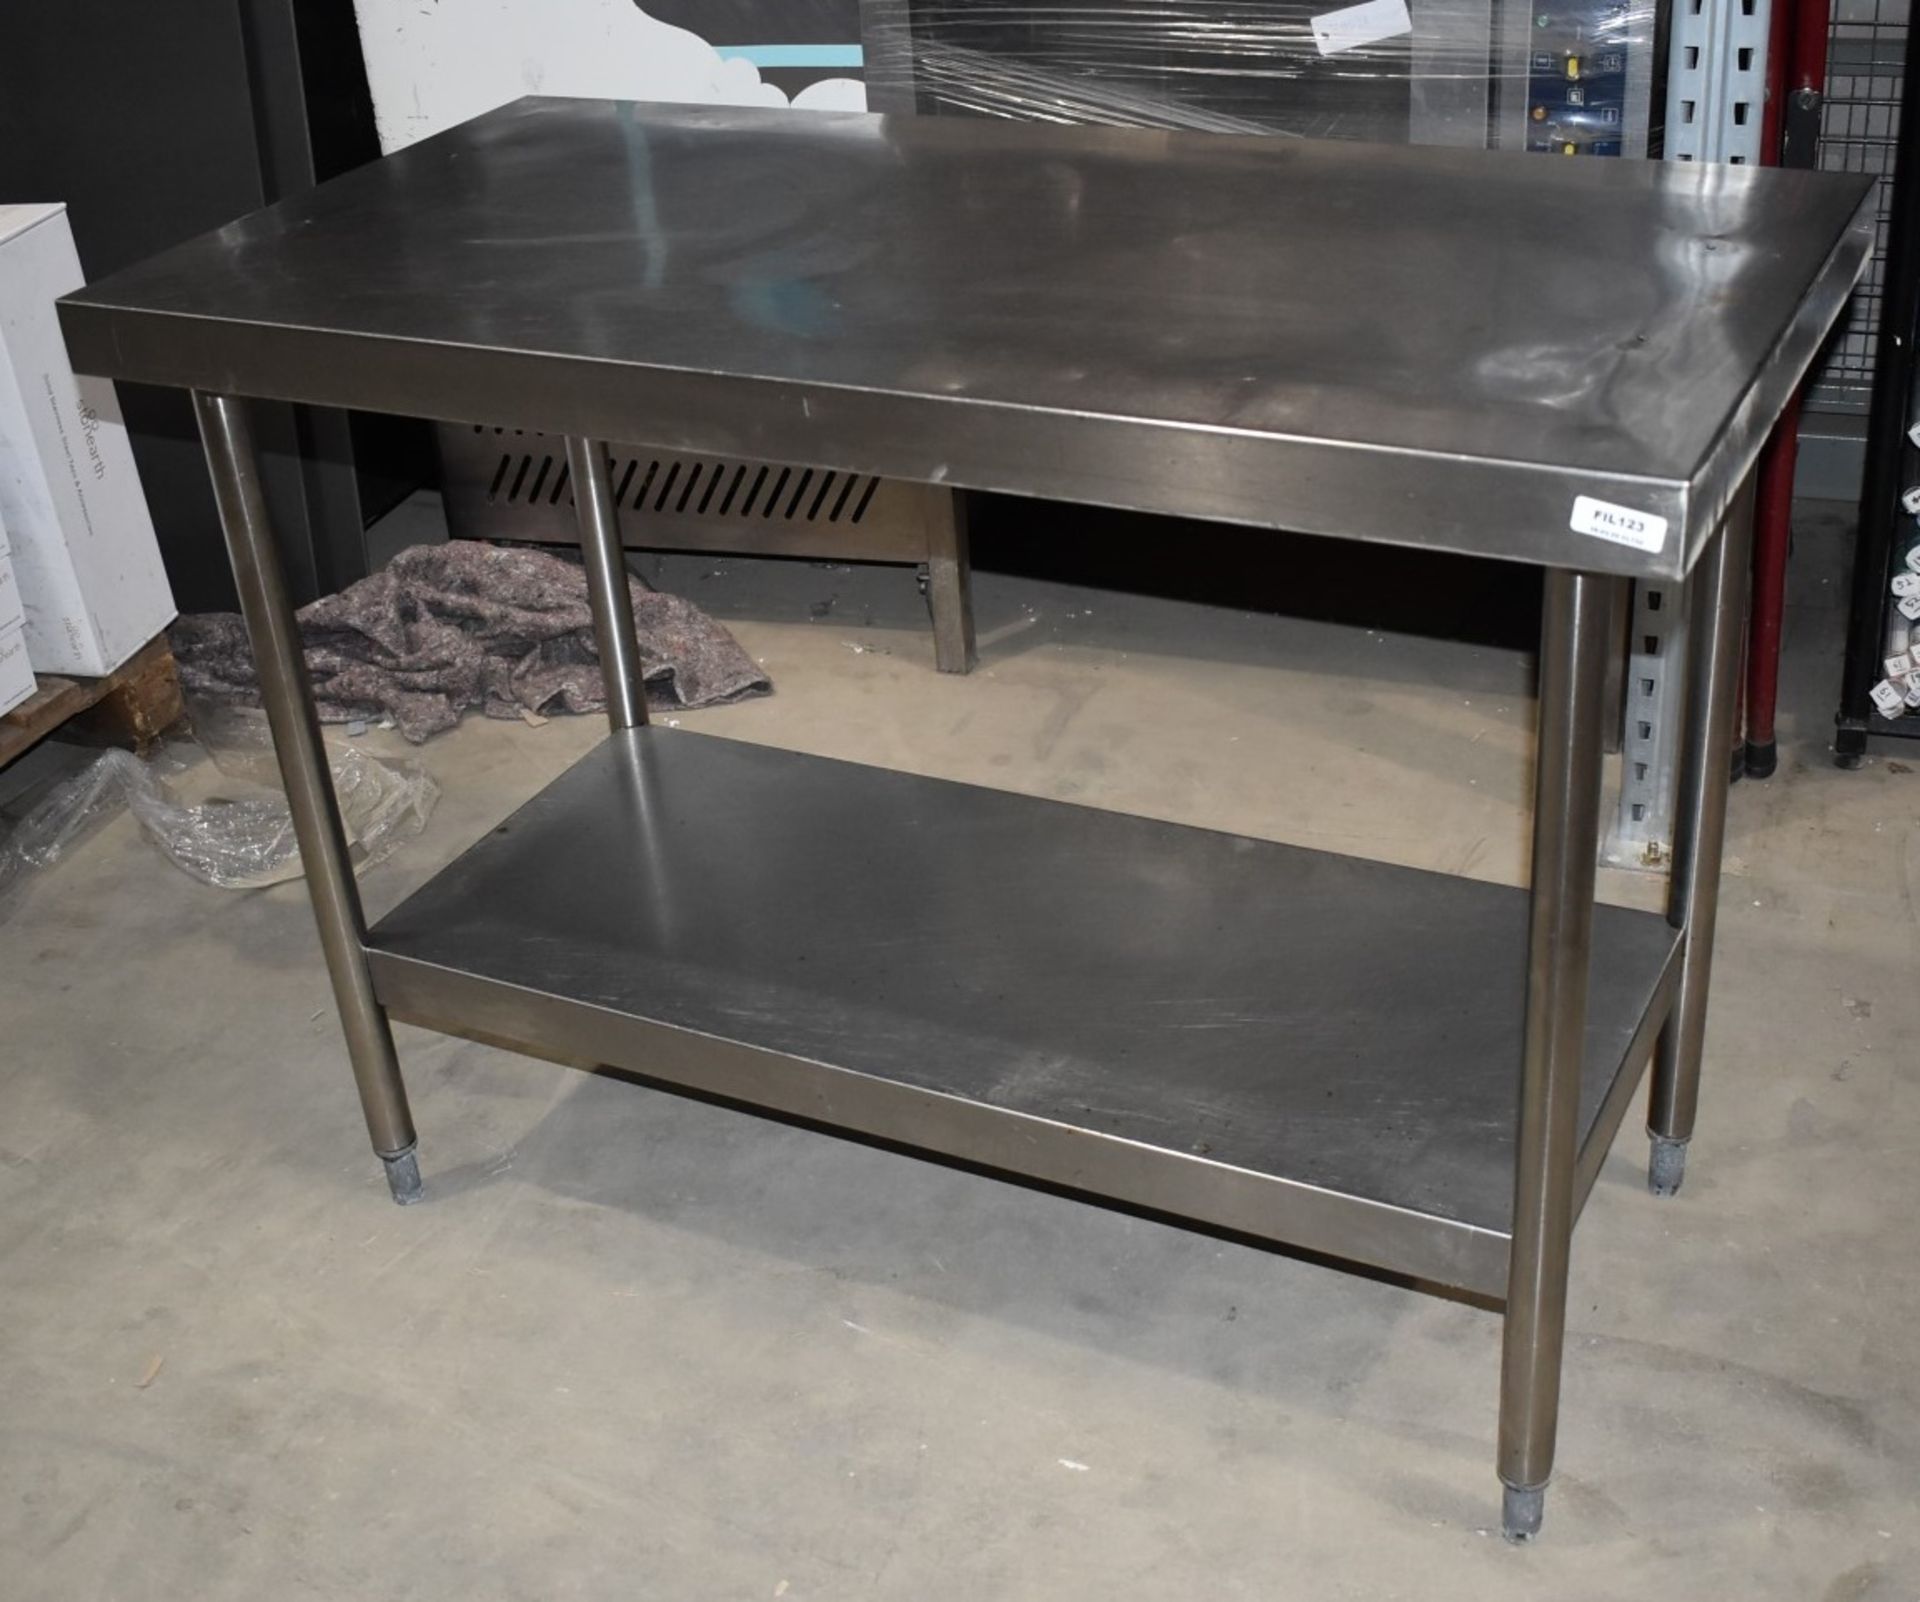 1 x Stainless Steel Prep Table With Undershelf - Dimensions: H90 x D120 x D60 cms - Image 2 of 5